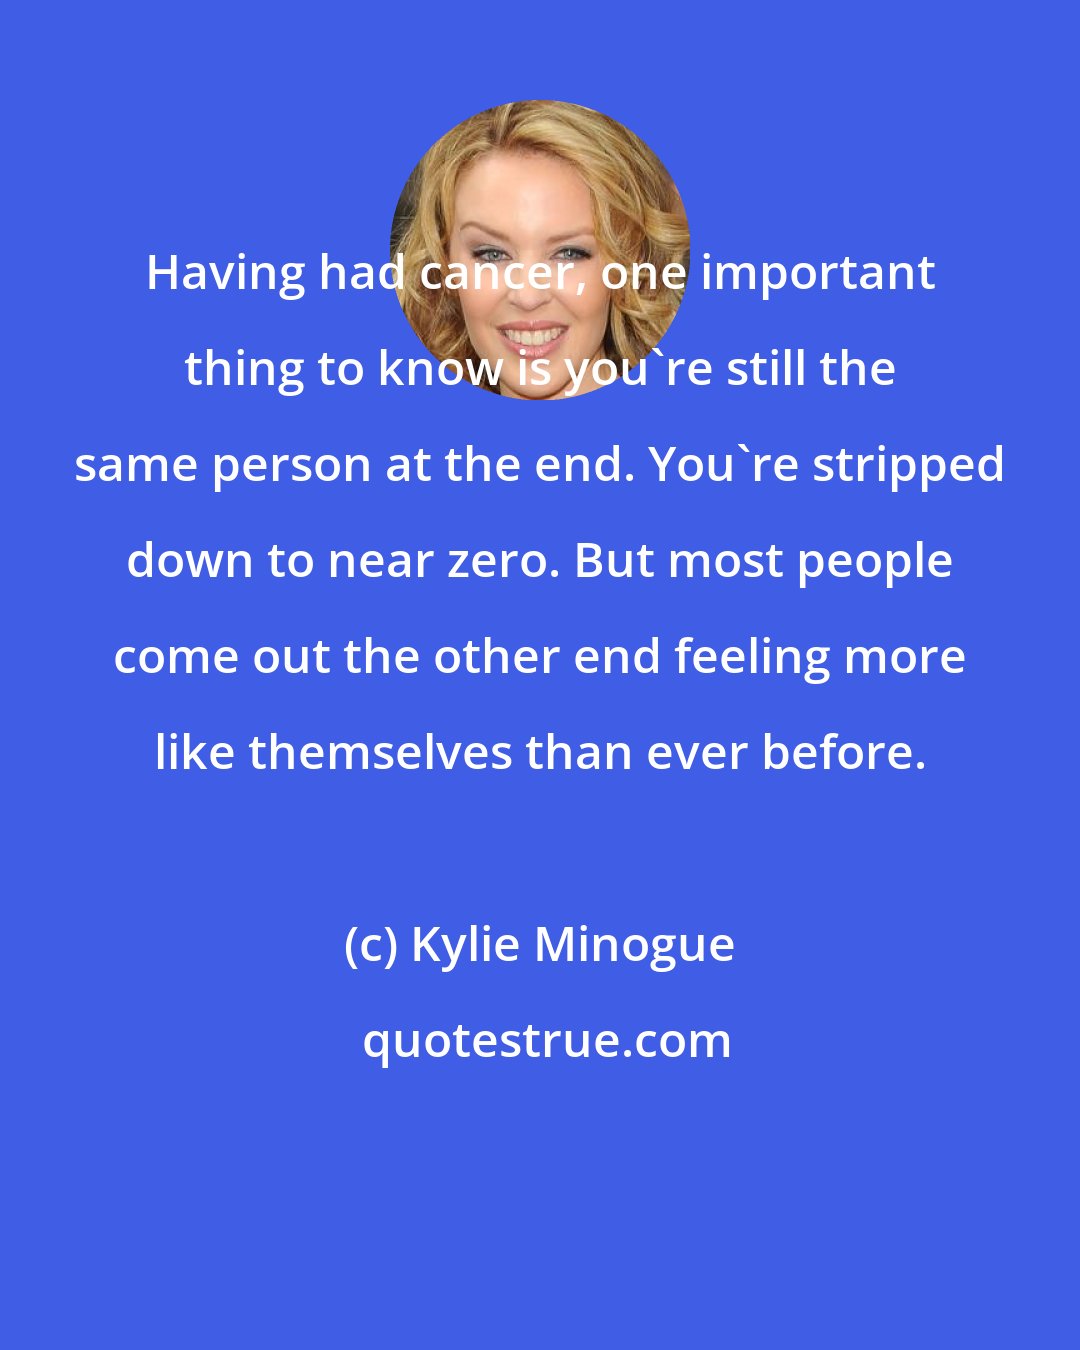 Kylie Minogue: Having had cancer, one important thing to know is you're still the same person at the end. You're stripped down to near zero. But most people come out the other end feeling more like themselves than ever before.